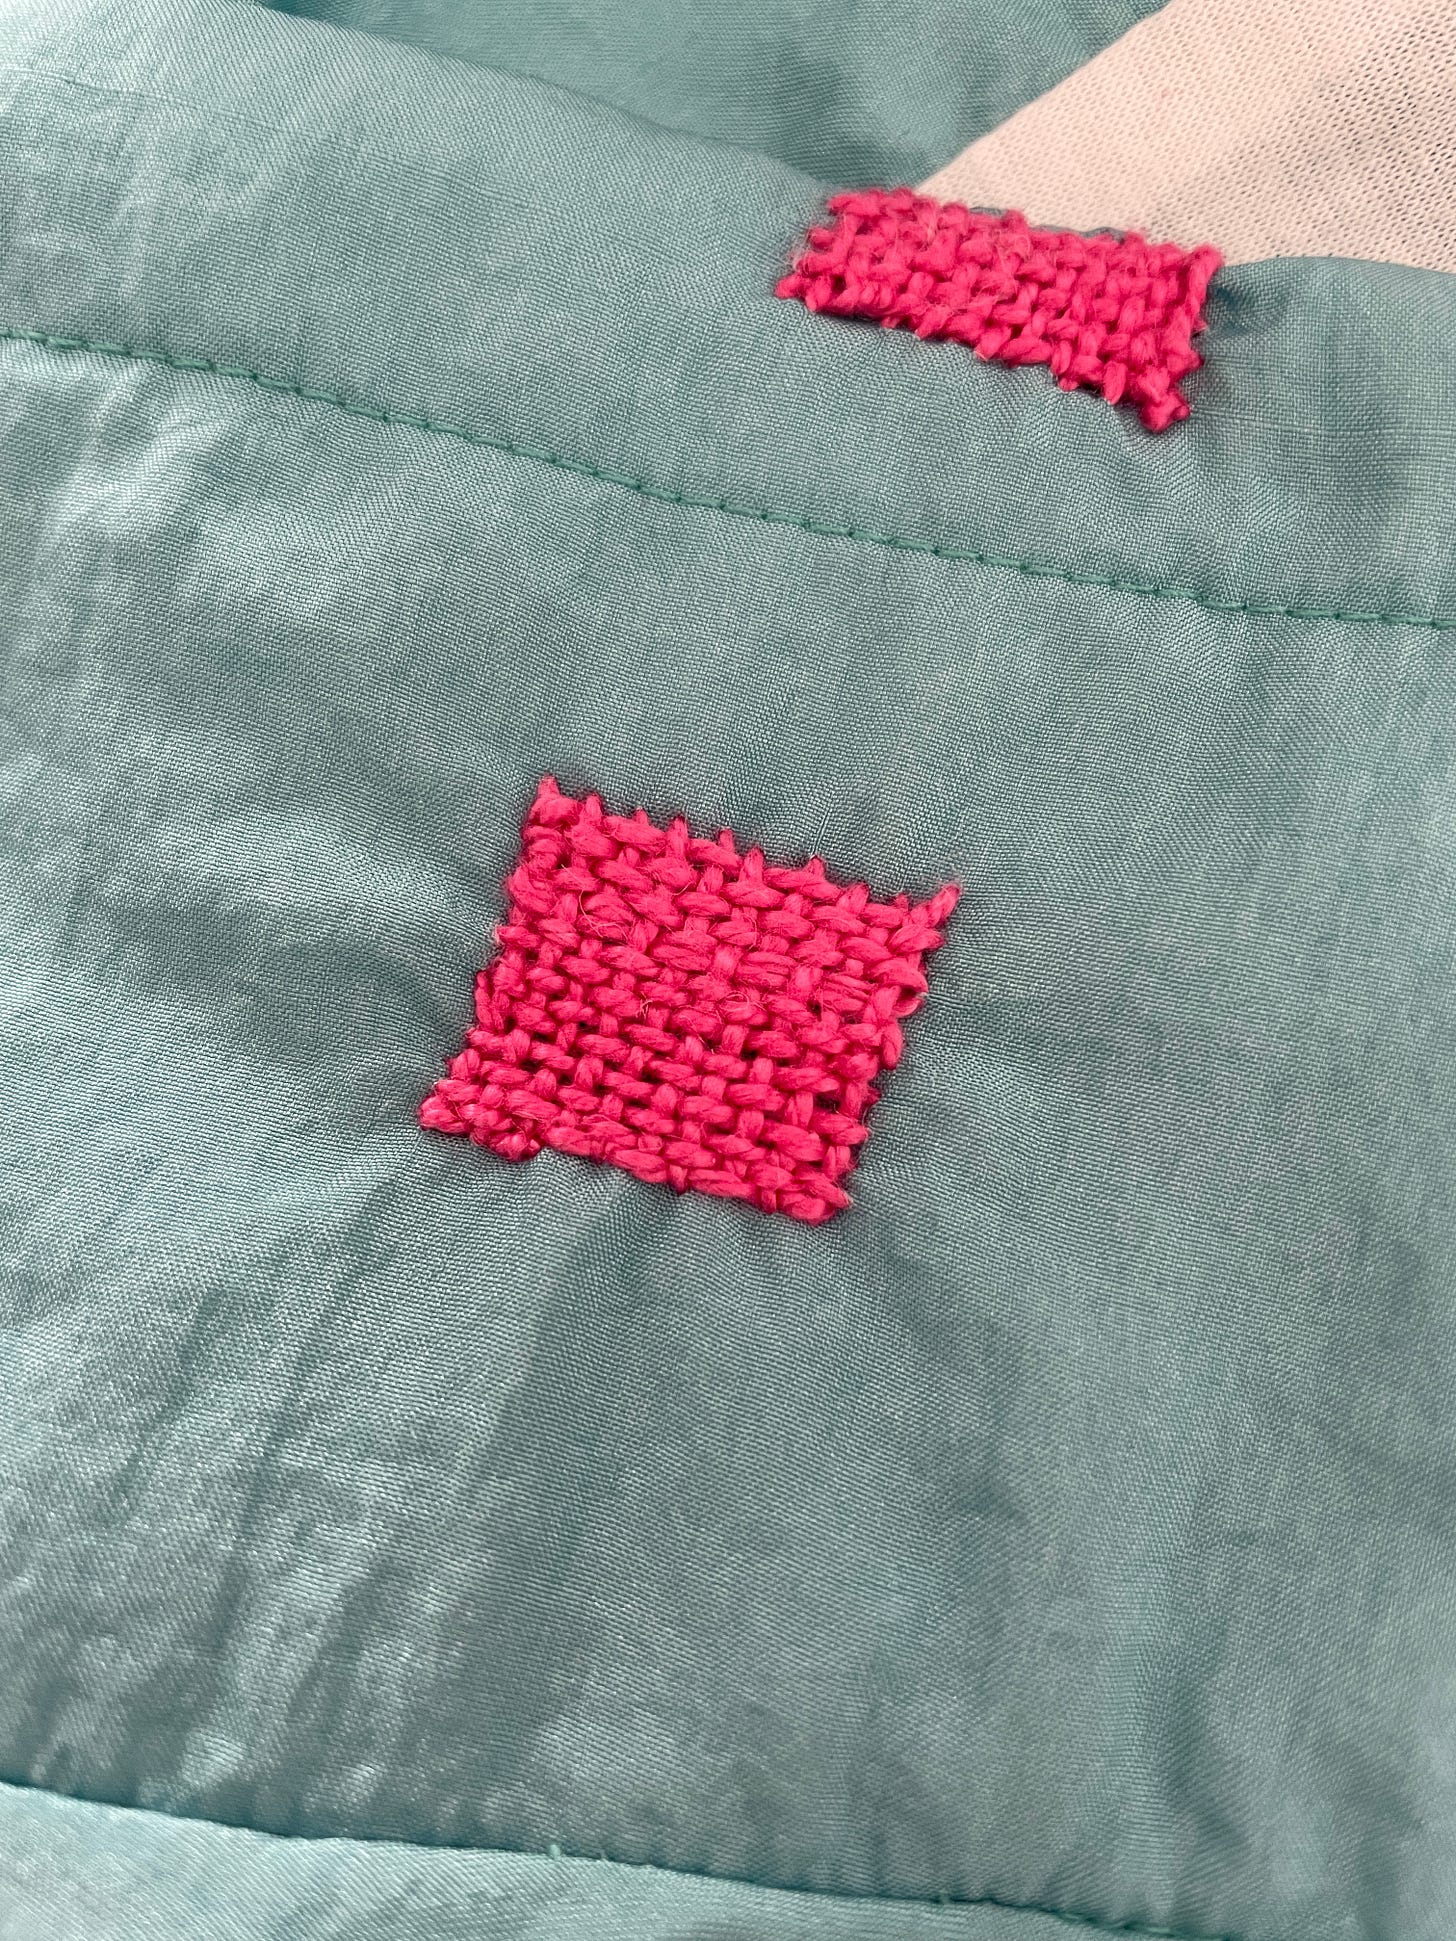 A closeup photo of visible mending on the windbreaker - Katharine has patched the holes by weaving bright pink thread on top.